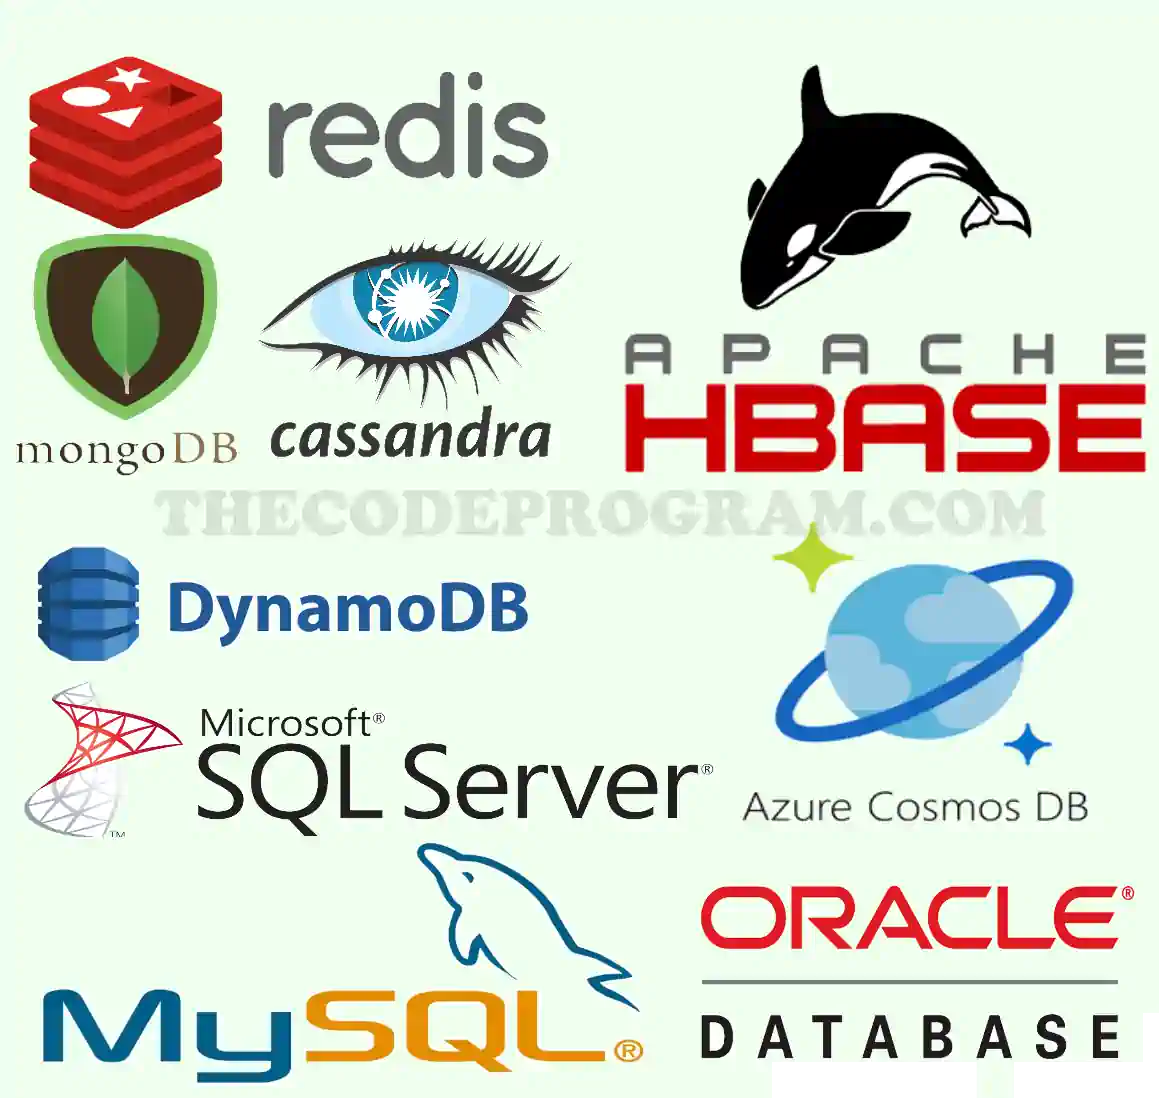 How can we chose a database system for our system